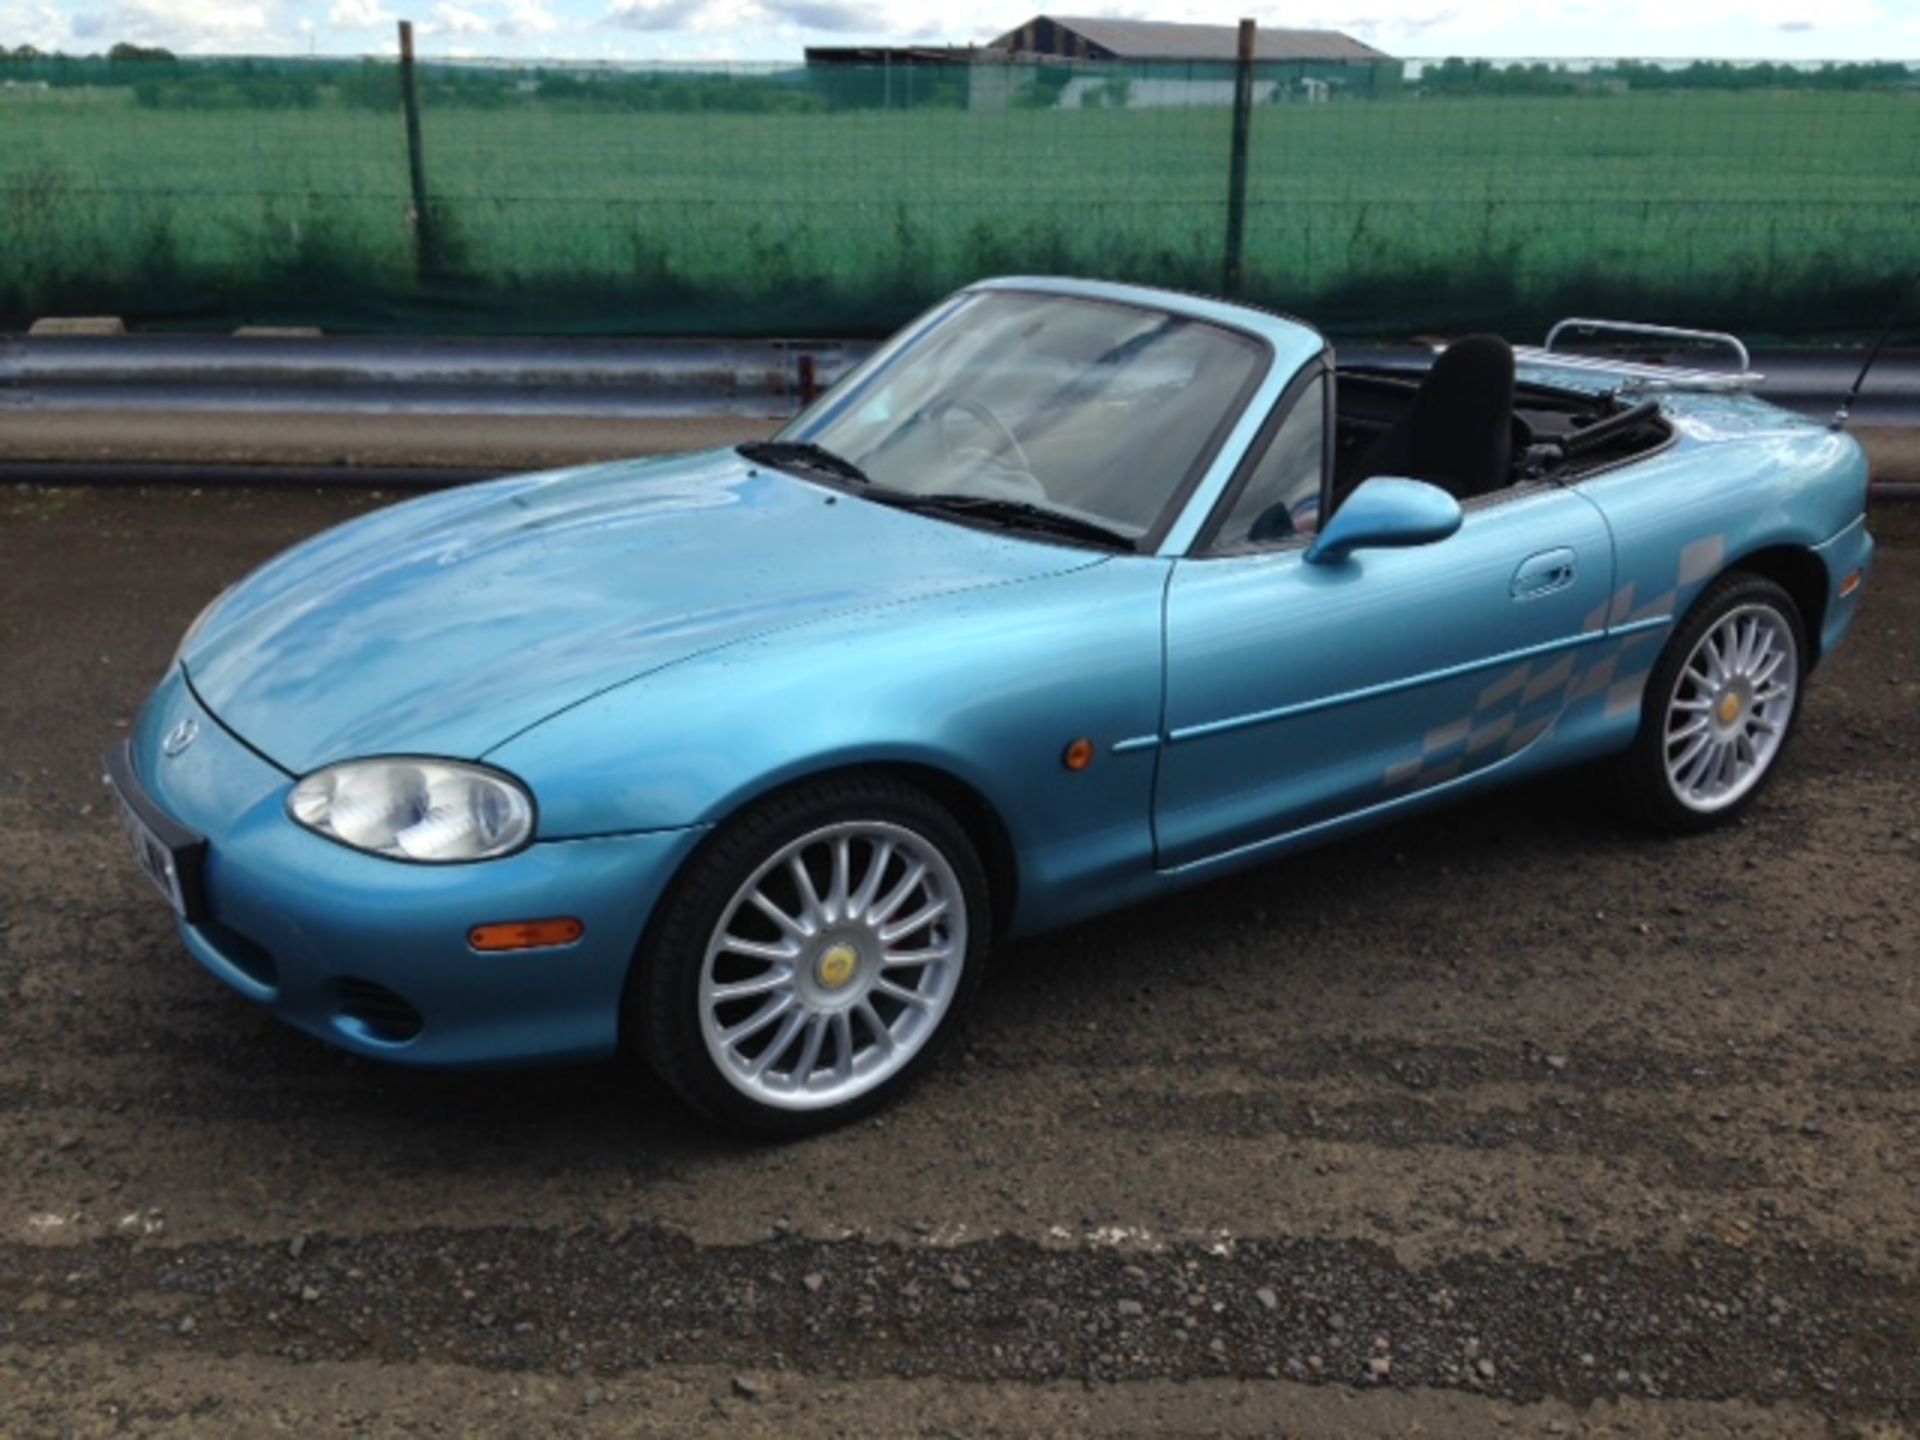 MAZDA, MX-5 1.8I - 1840cc, Chassis number JMZNB18P200223449 - presented in Crystal Blue Metallic, - Image 10 of 11